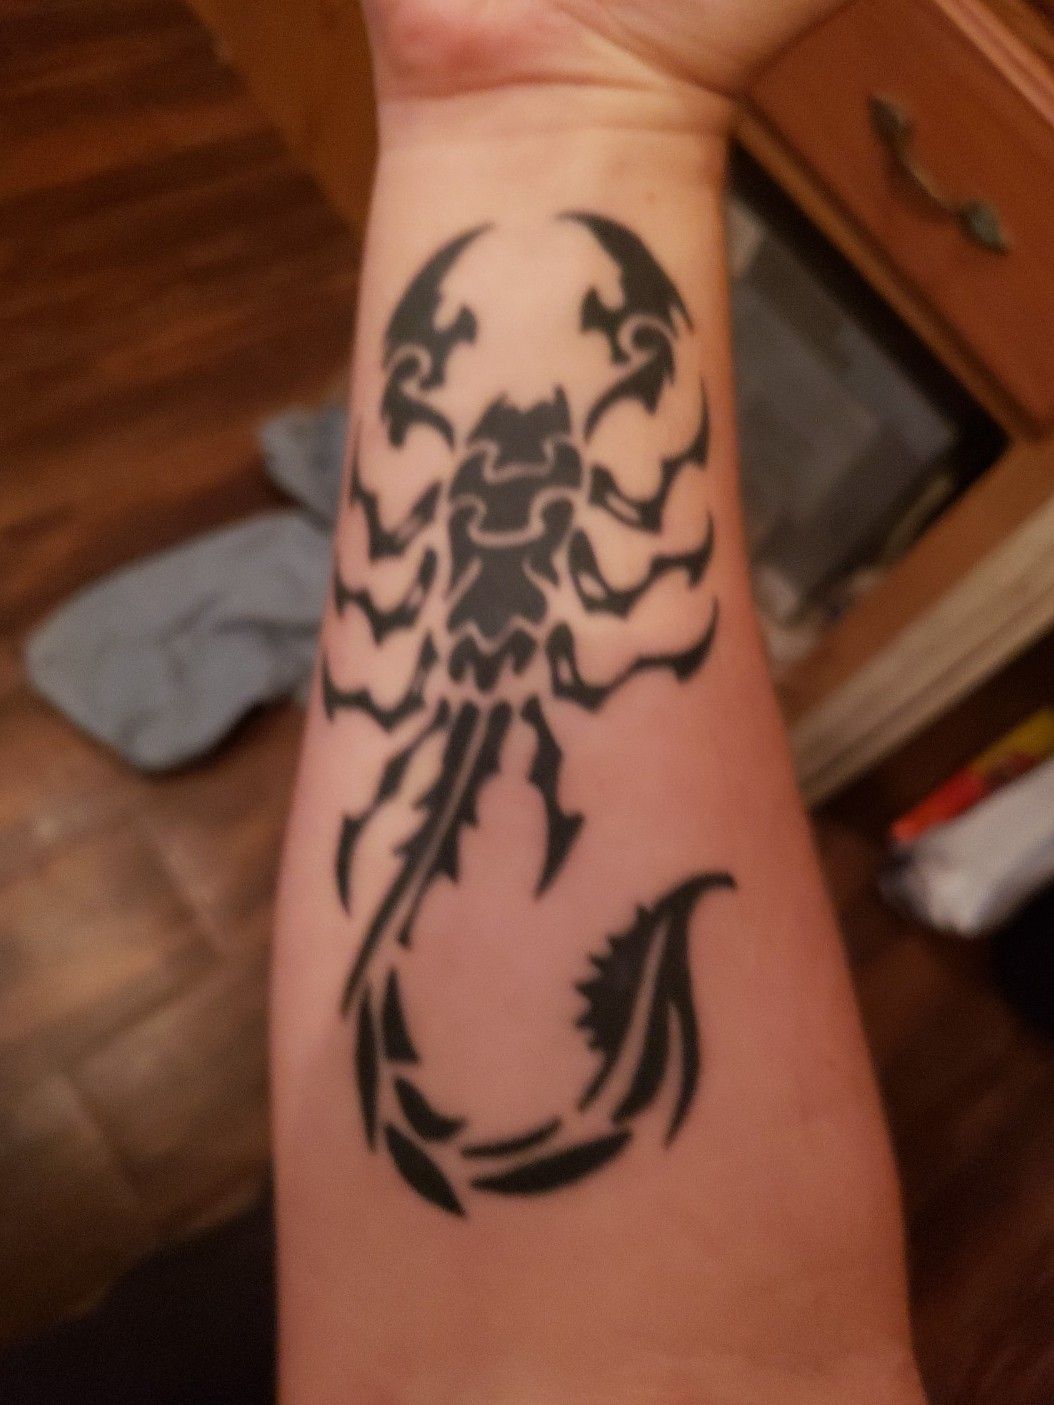 Hello I am thinking of getting a scorpion tattoo on my forearm or my neck  ..what's your opinion ? Will it affect me on my daily life or my job or my